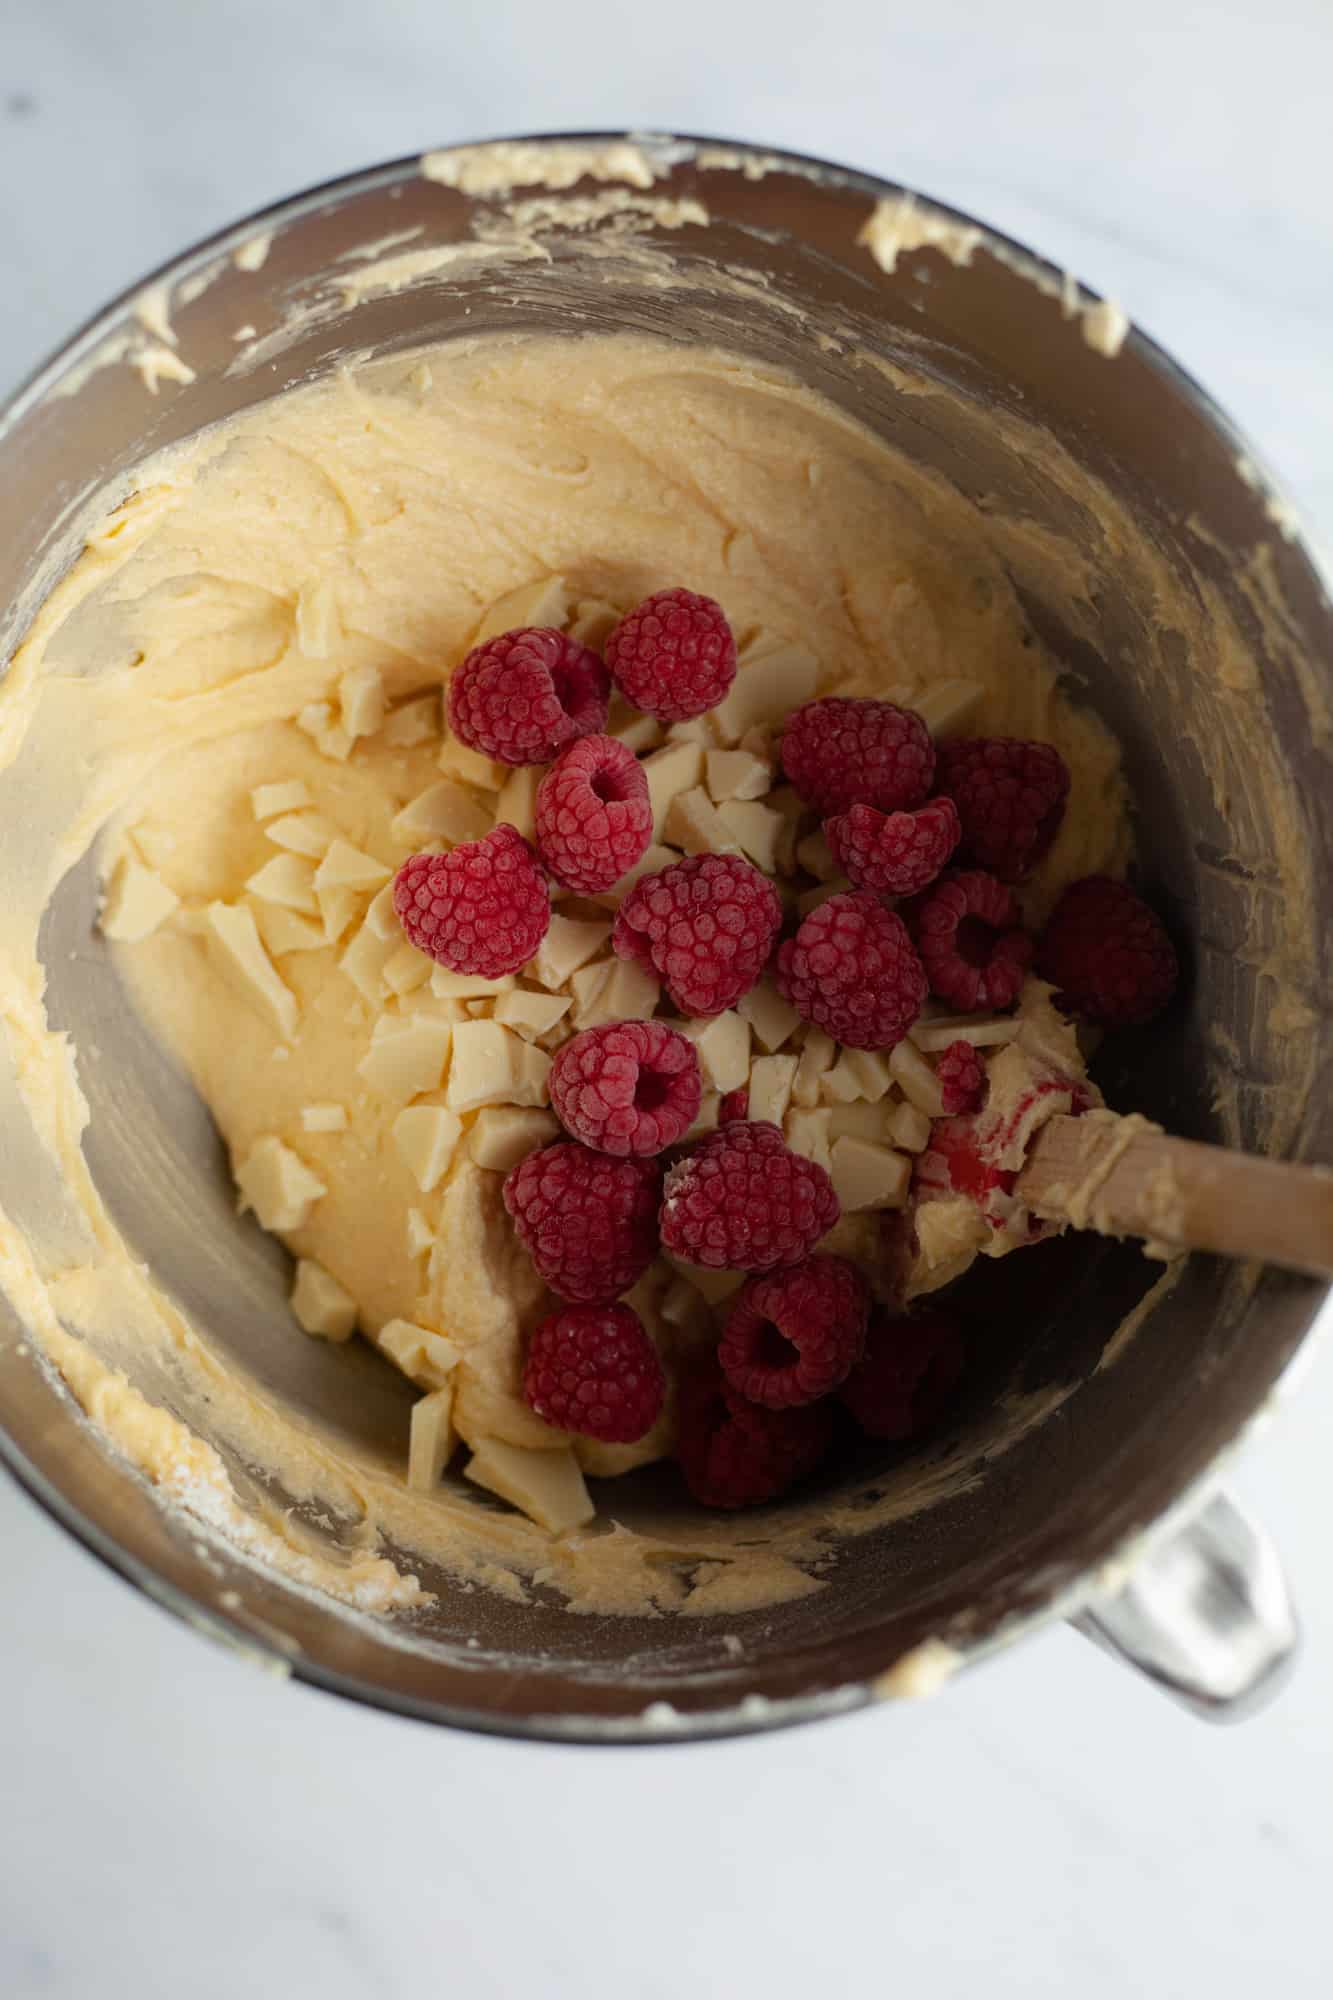 Cake batter, raspberries and white chocolate chunks in a large silver bowl